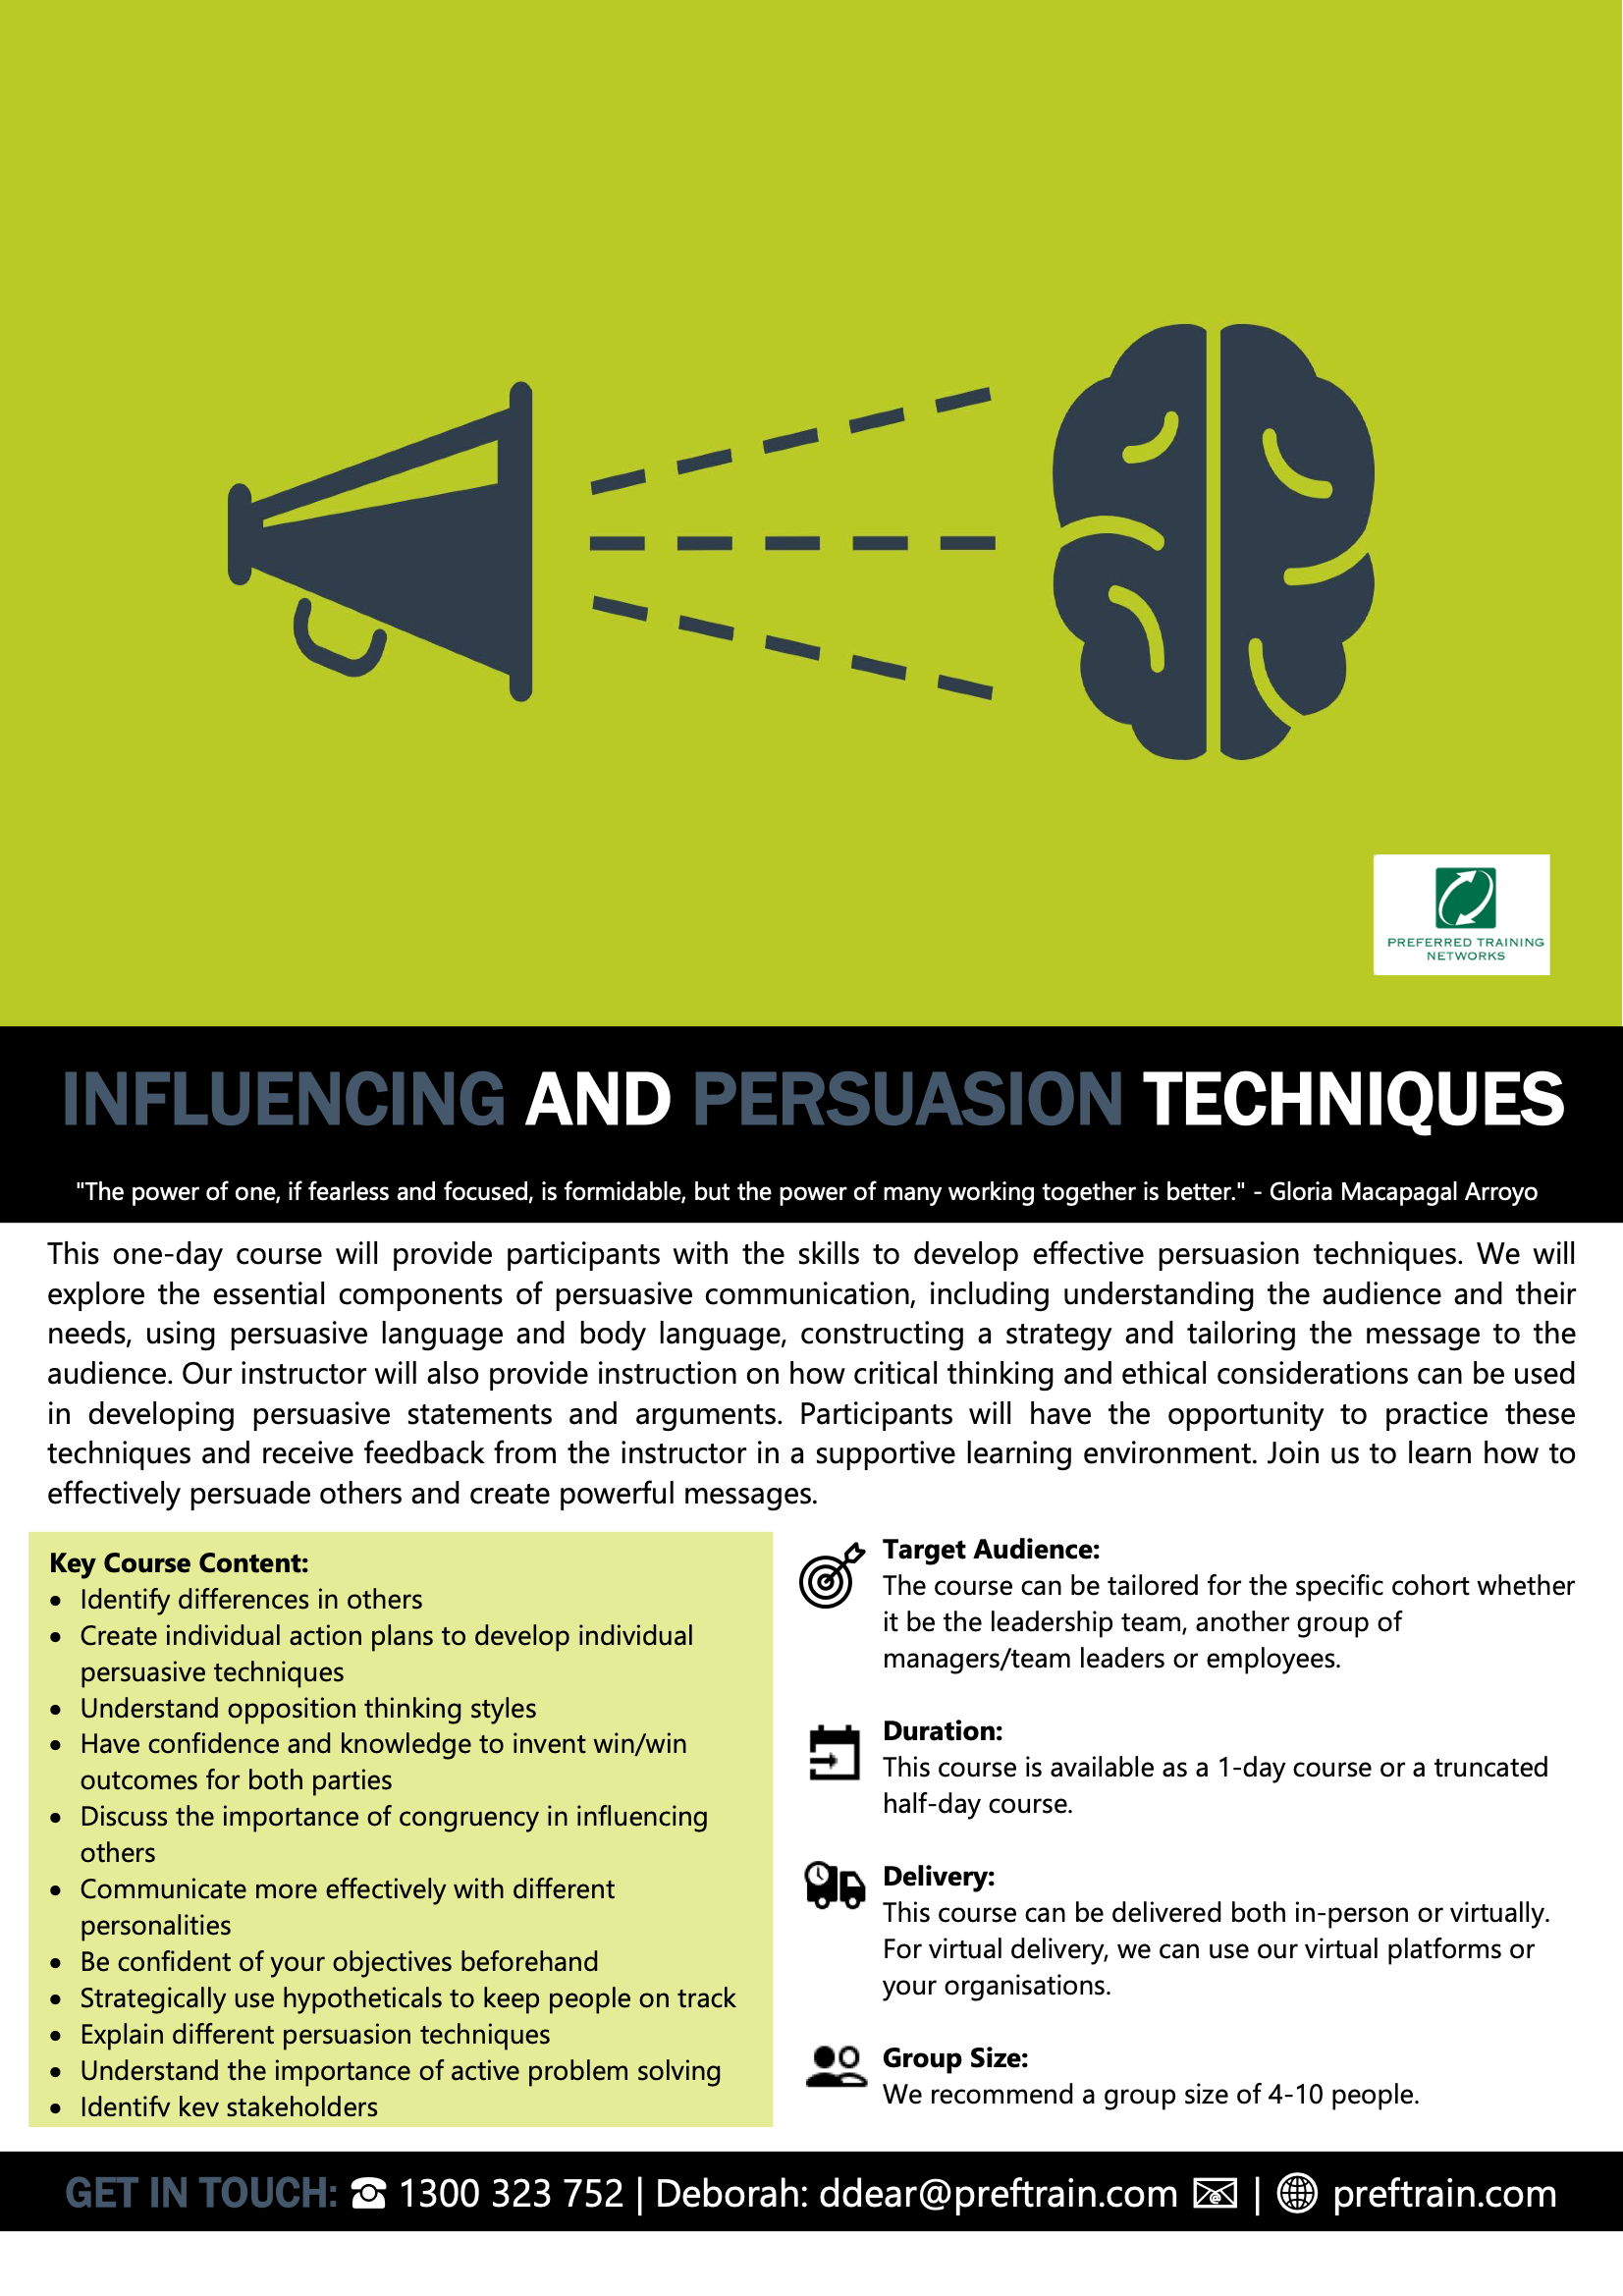 INFLUENCING AND PERSUASION TECHNIQUES